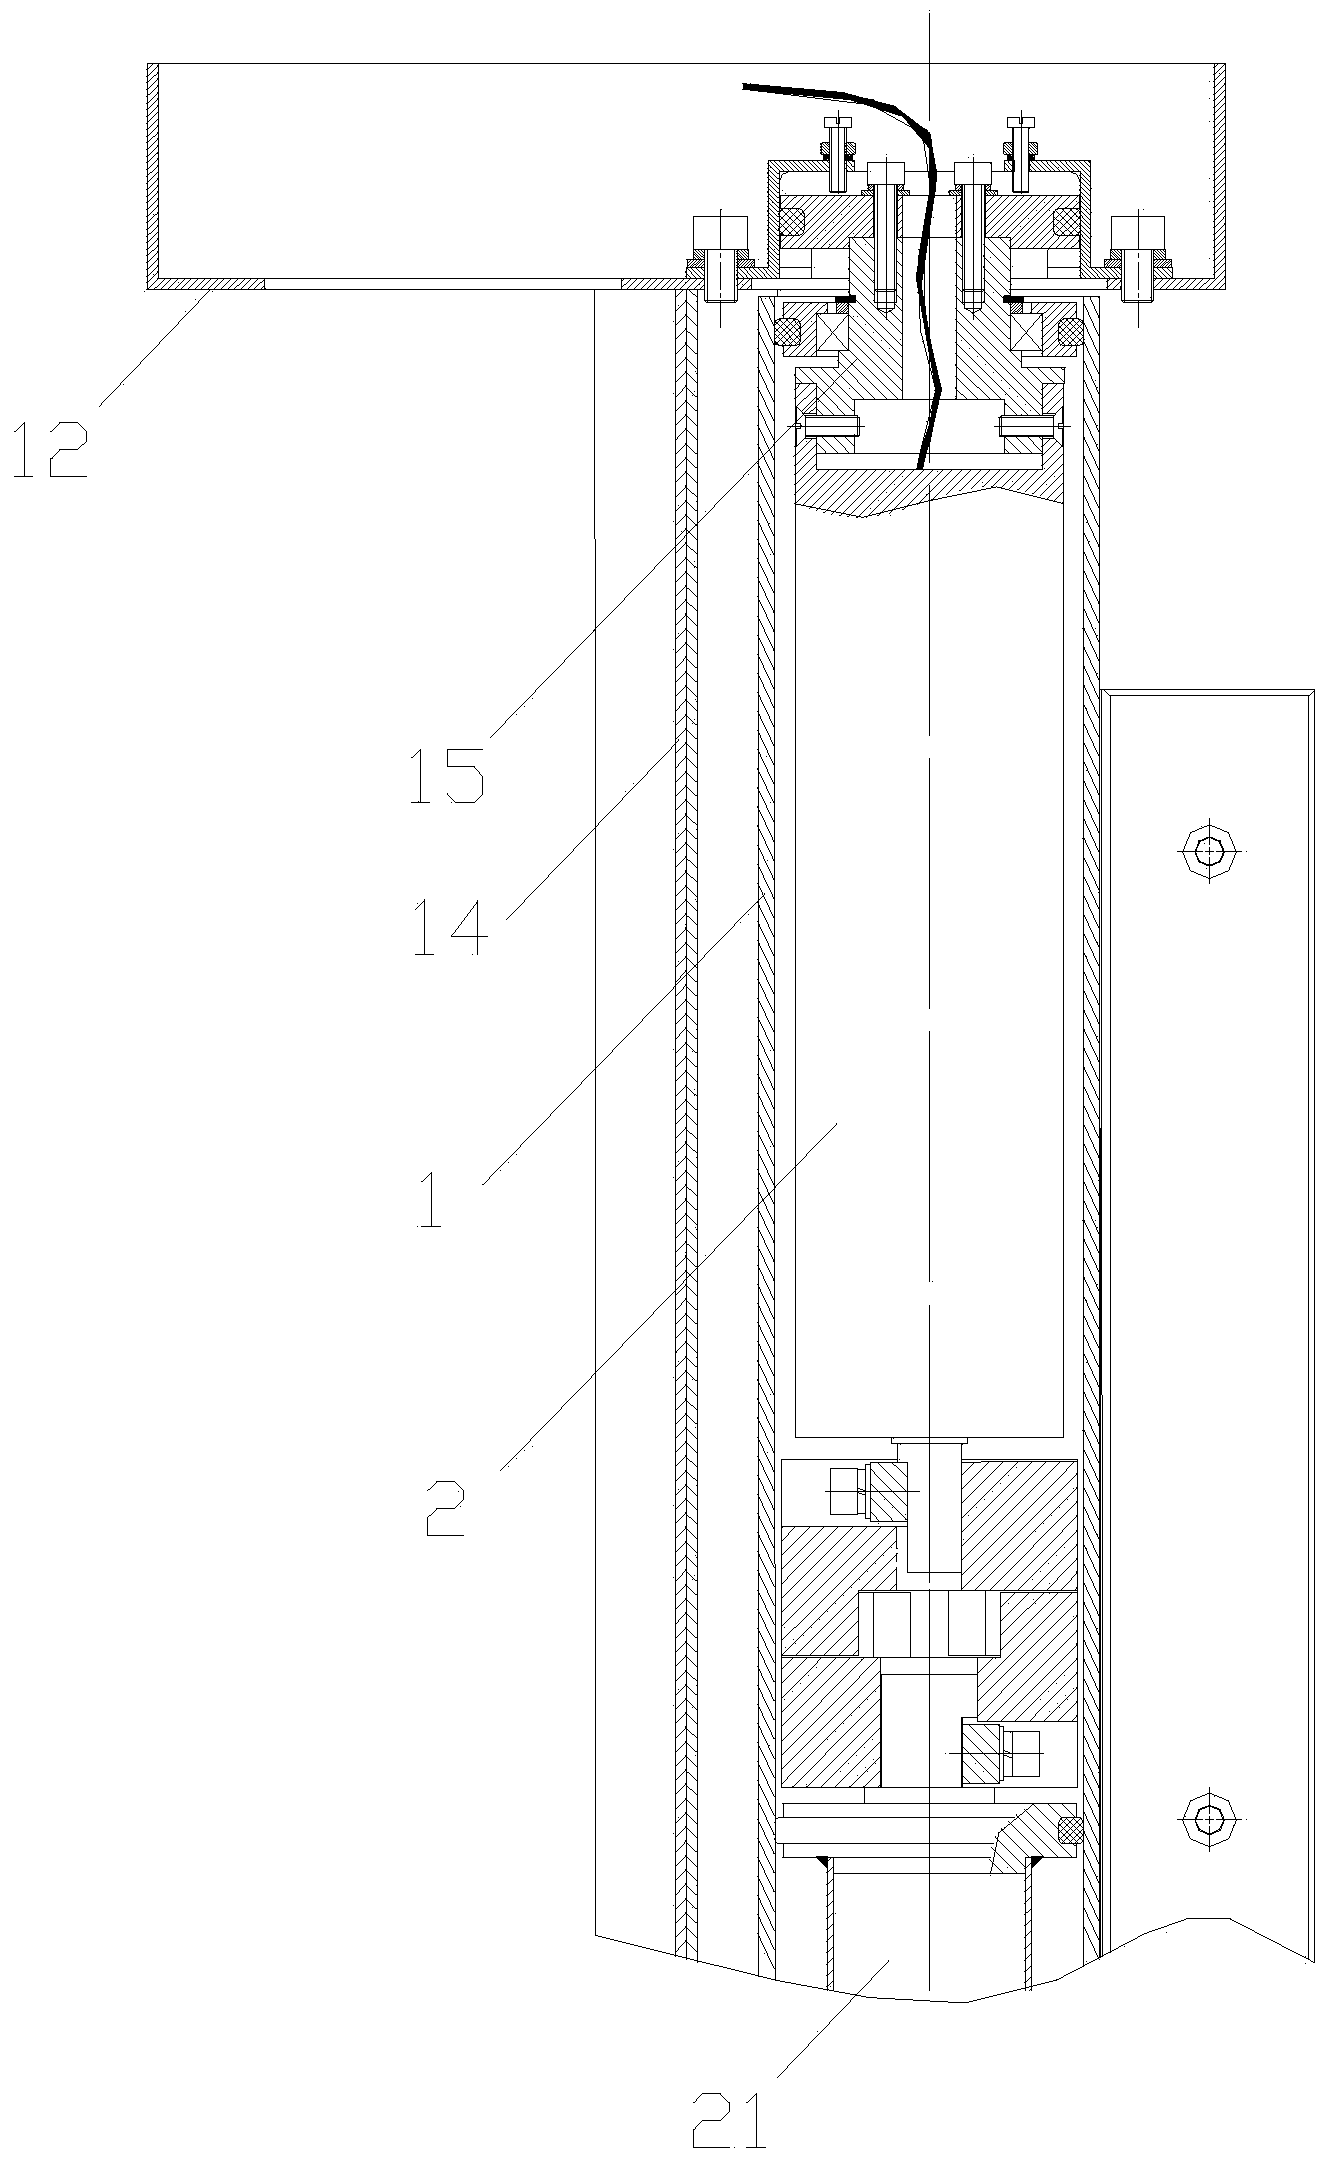 Revolving door mechanism for automatic entrance guard device